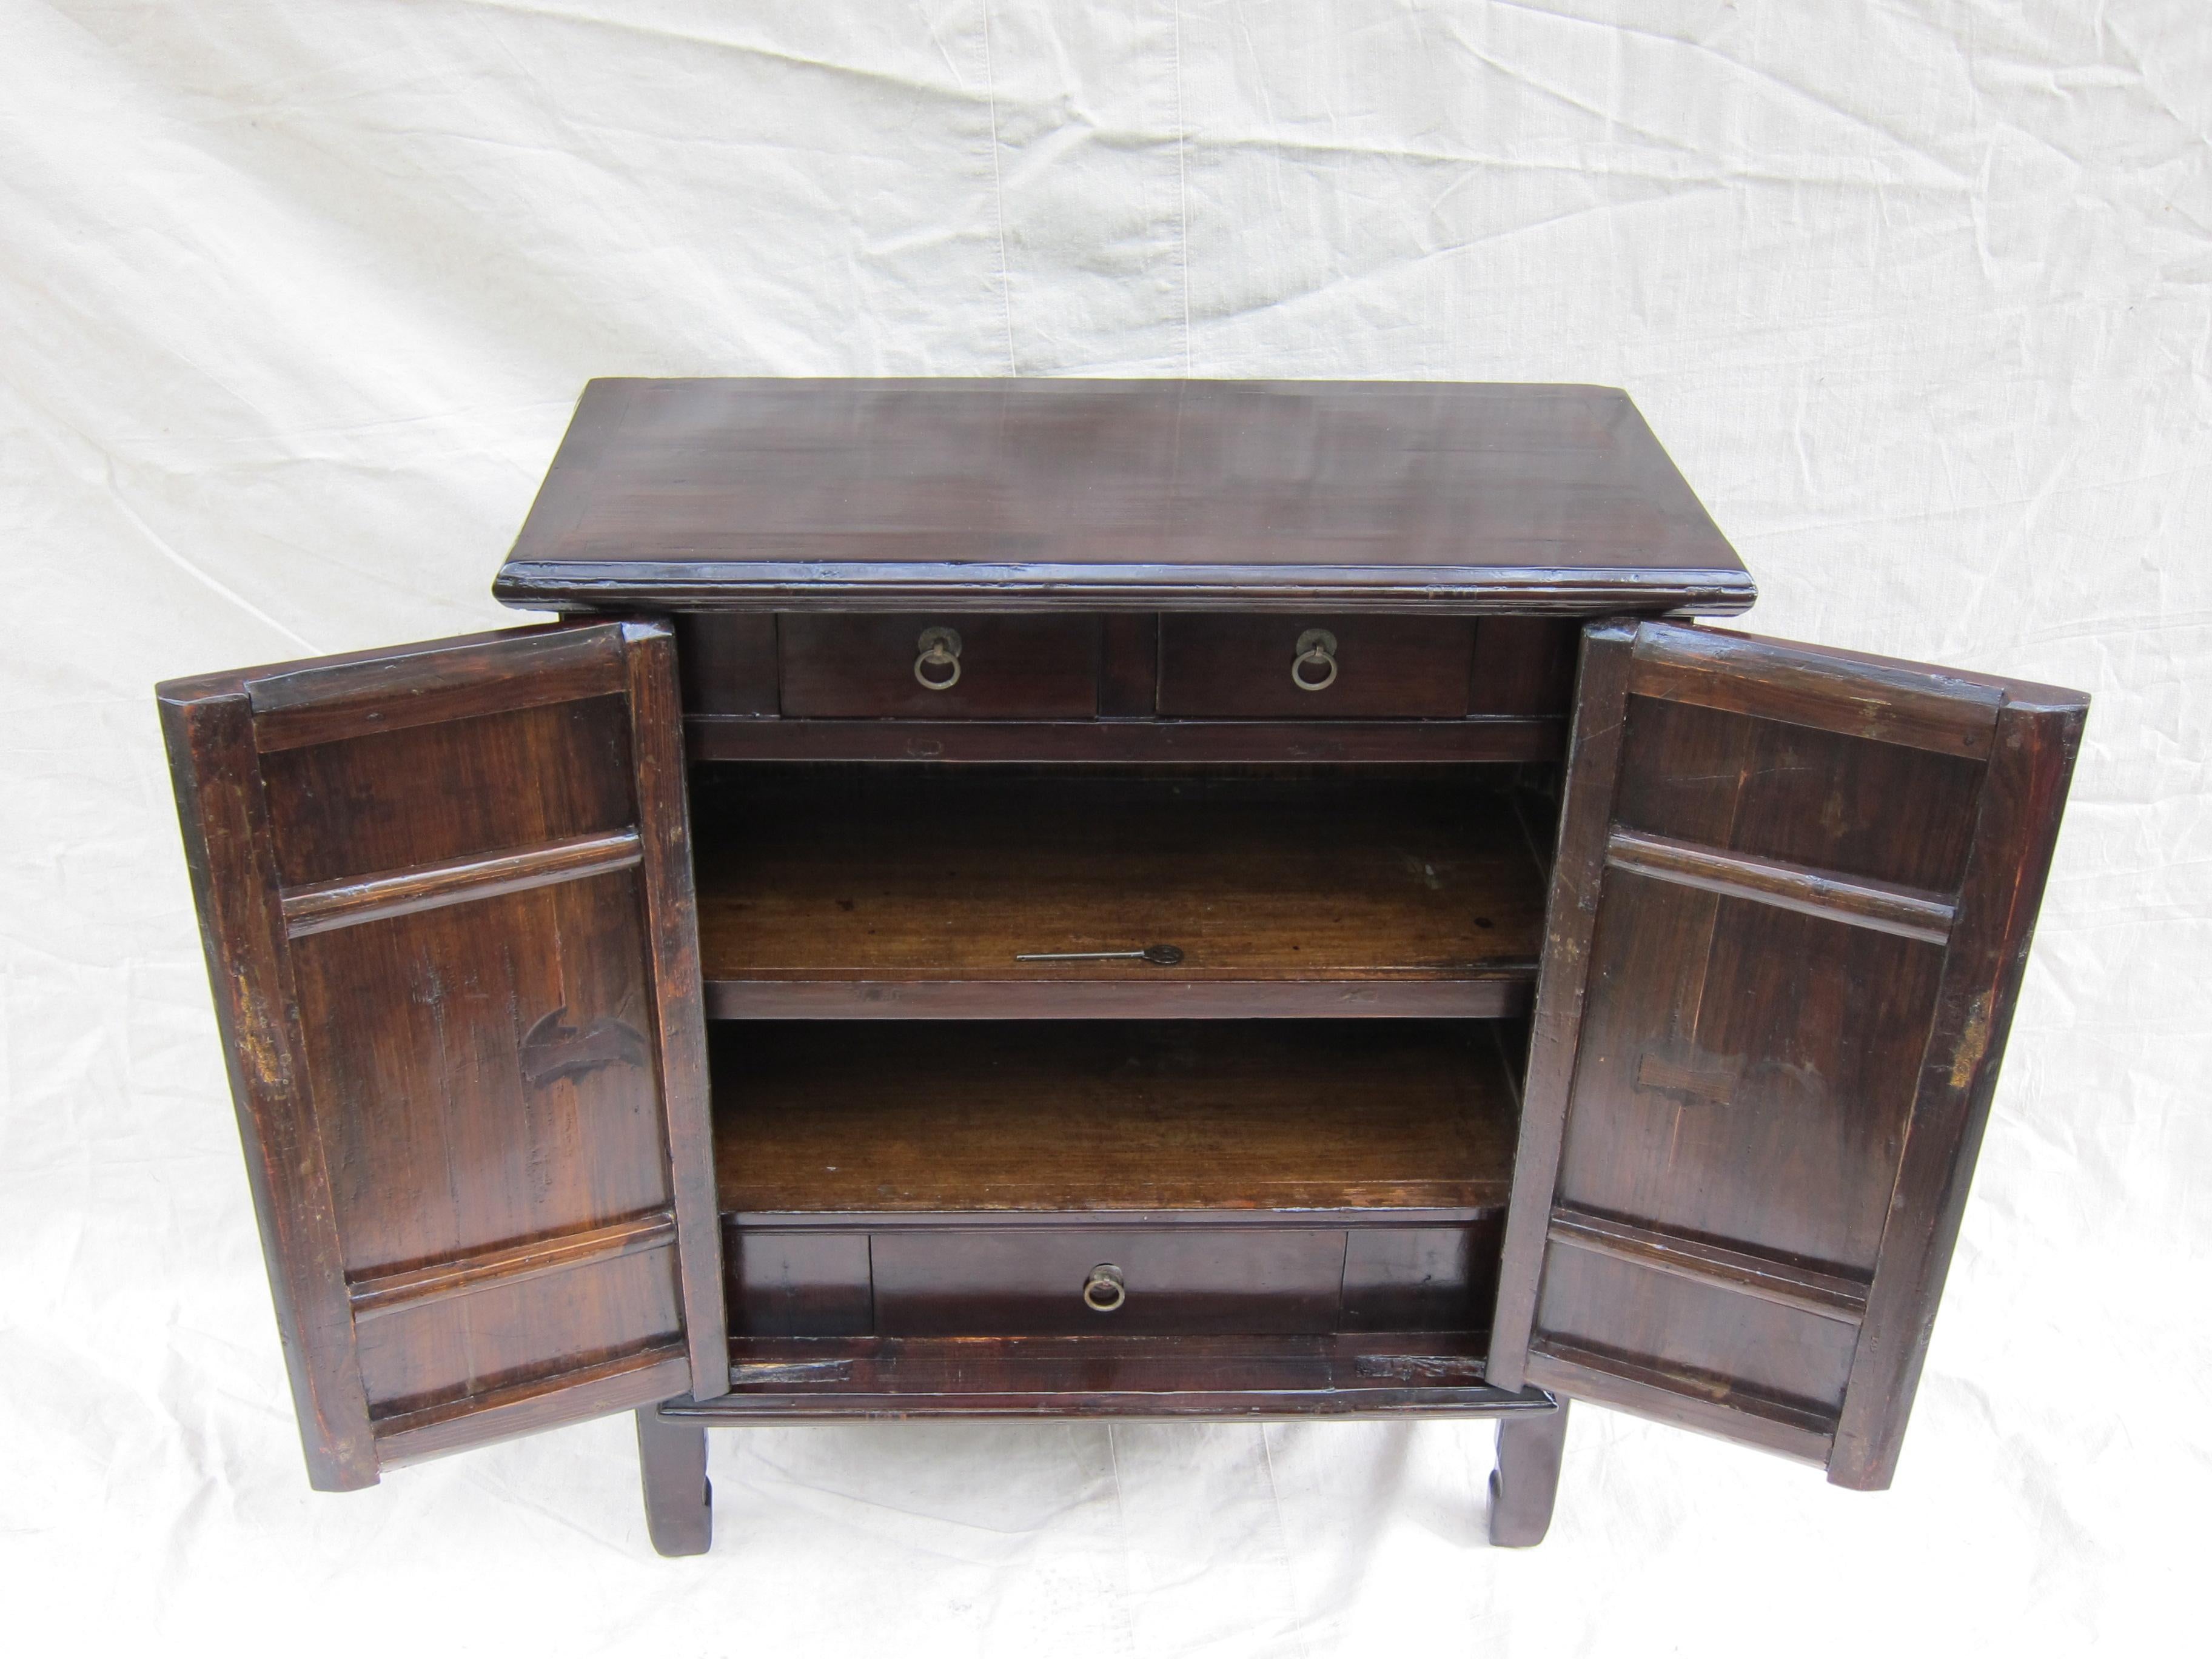 19th century Chinese middle cabinet. Middle cabinet having two upper drawers and middle and lower shelf storage inside. Very good condition. Attractive size can be placed in narrow or tight areas. Good for everyday use. 
  